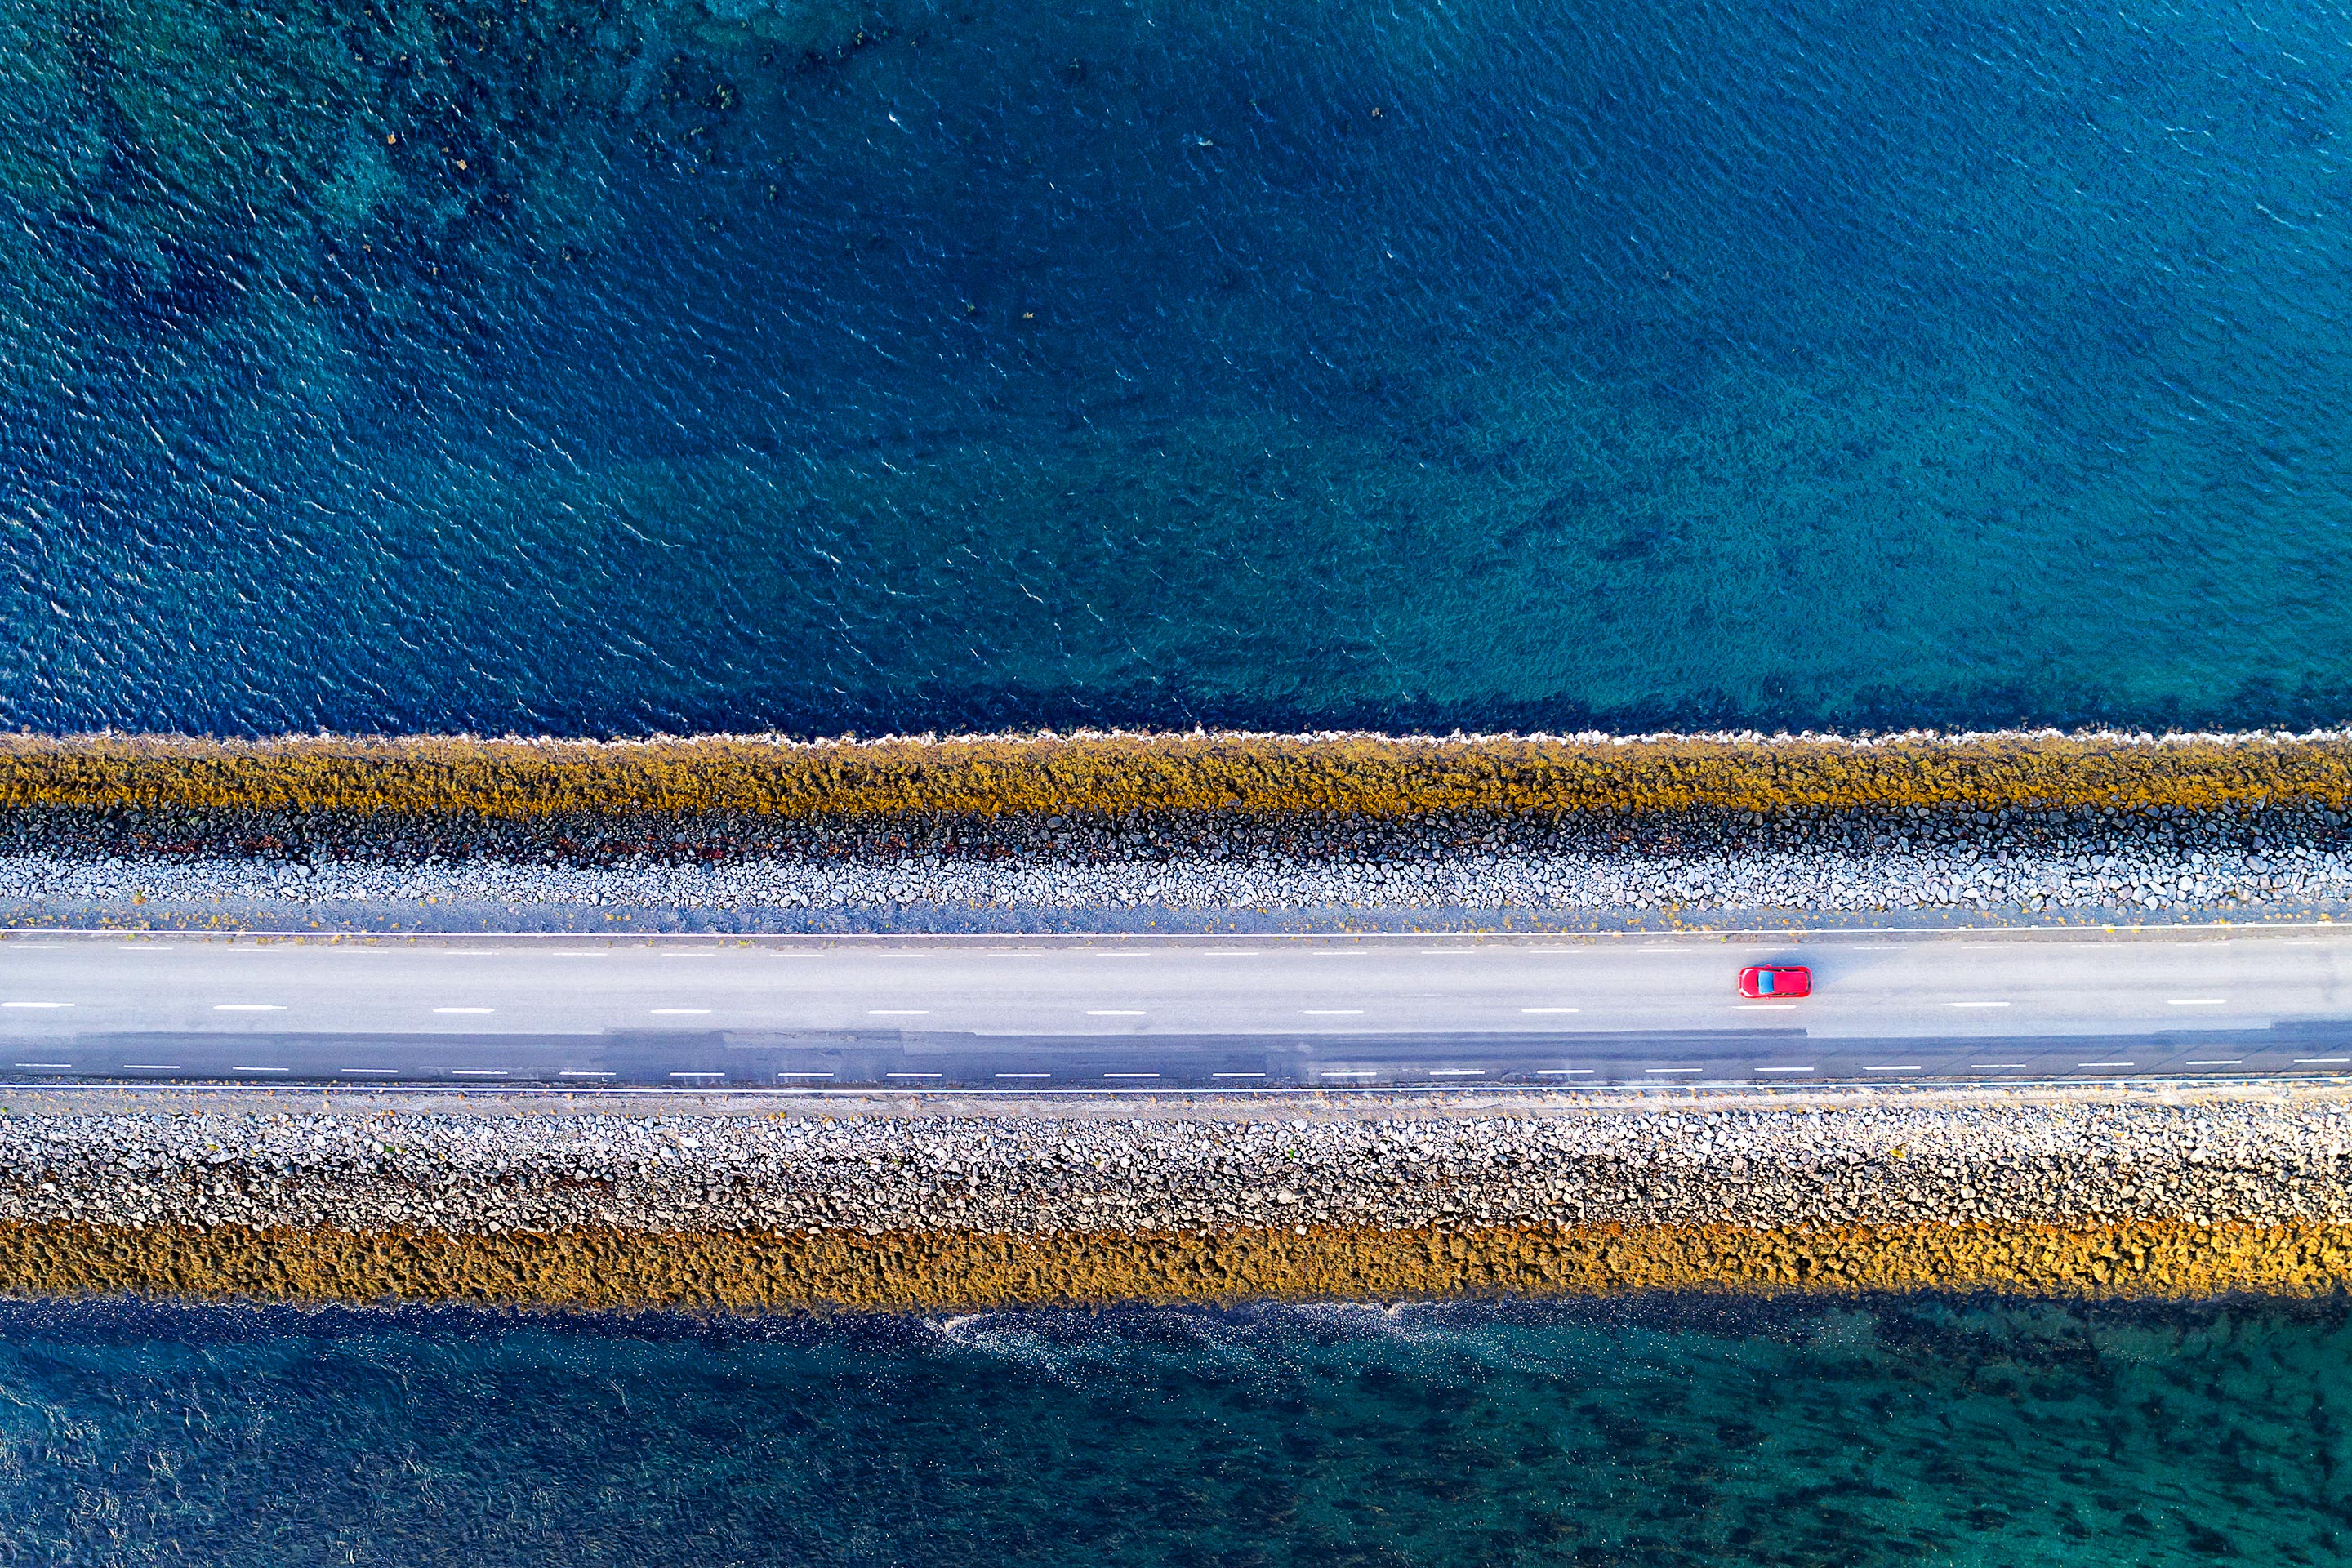 A red car drives down a single road over blue water, representing connectivity.